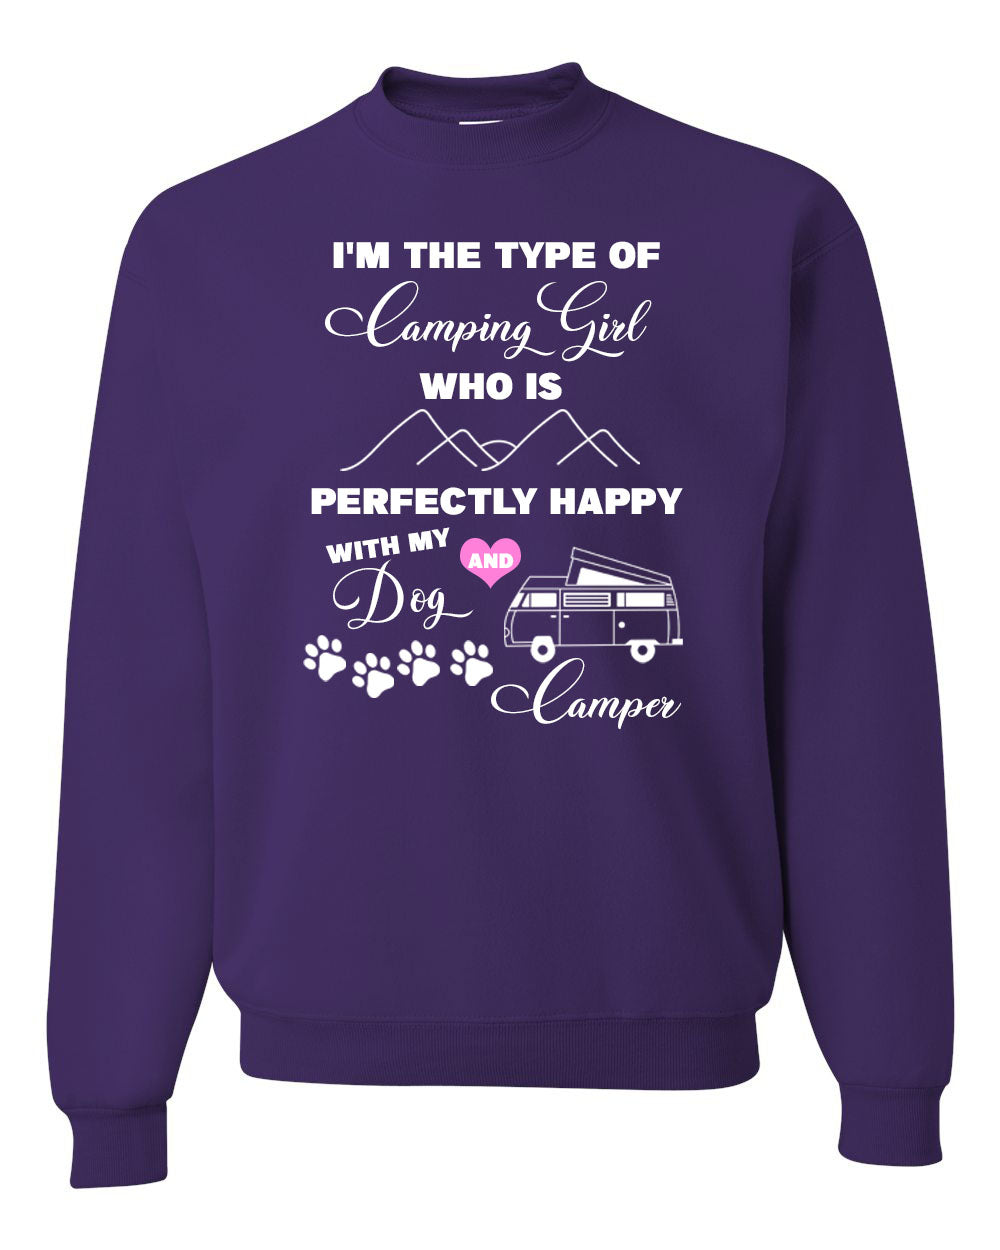 Dogs and camping non hooded sweatshirt